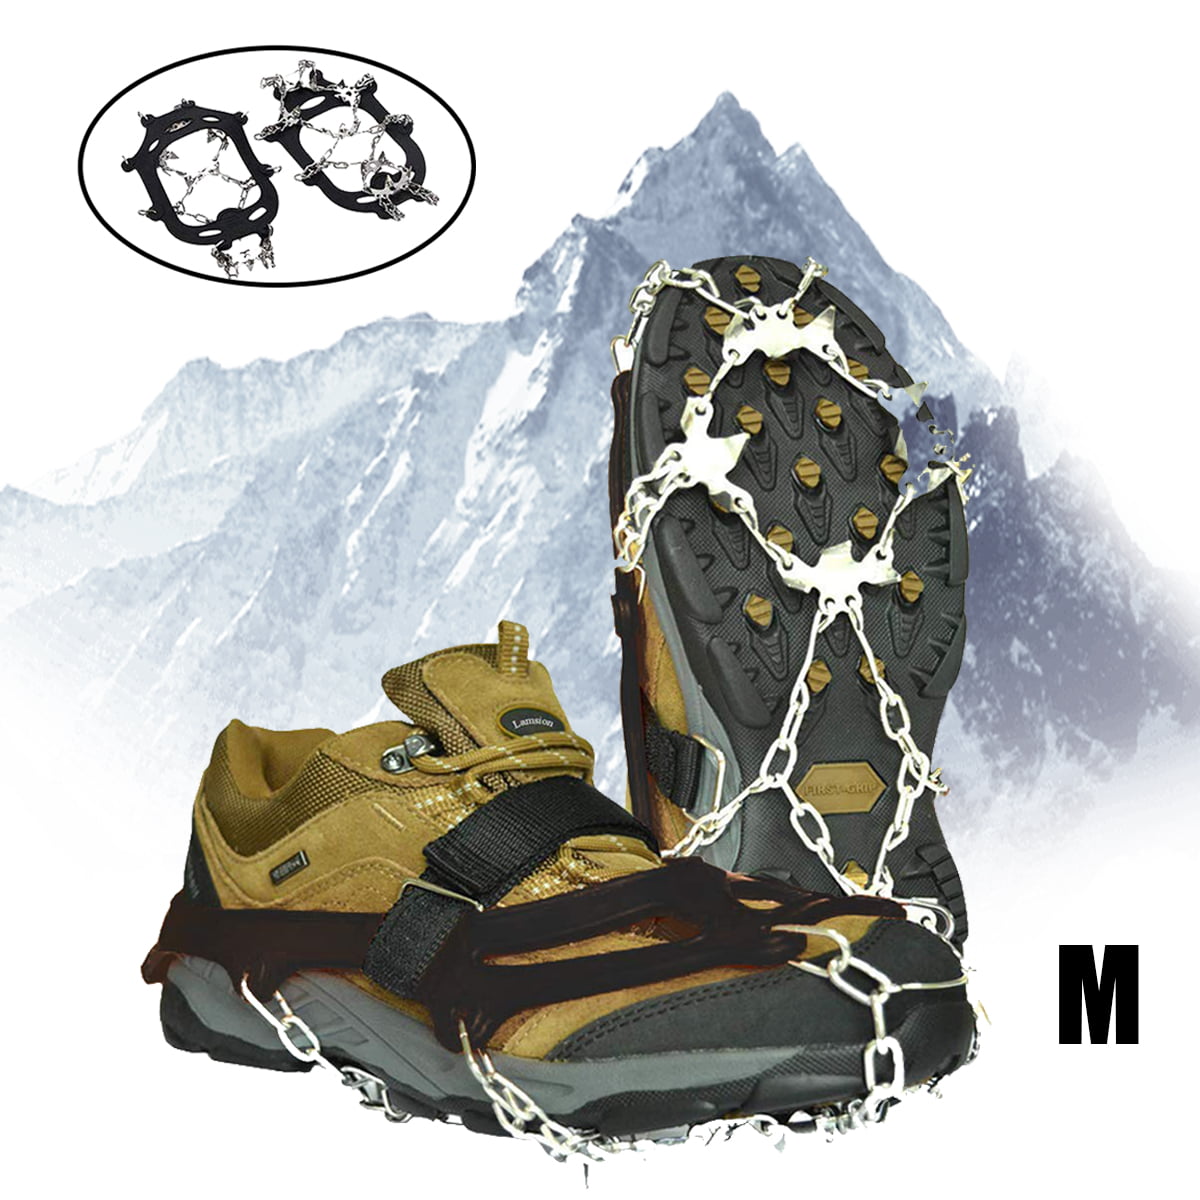 Climbing and Hiking Jogging Unigear Ice Traction Cleats Ice Snow Grips Crampons with 18 Shoe Spikes for Walking